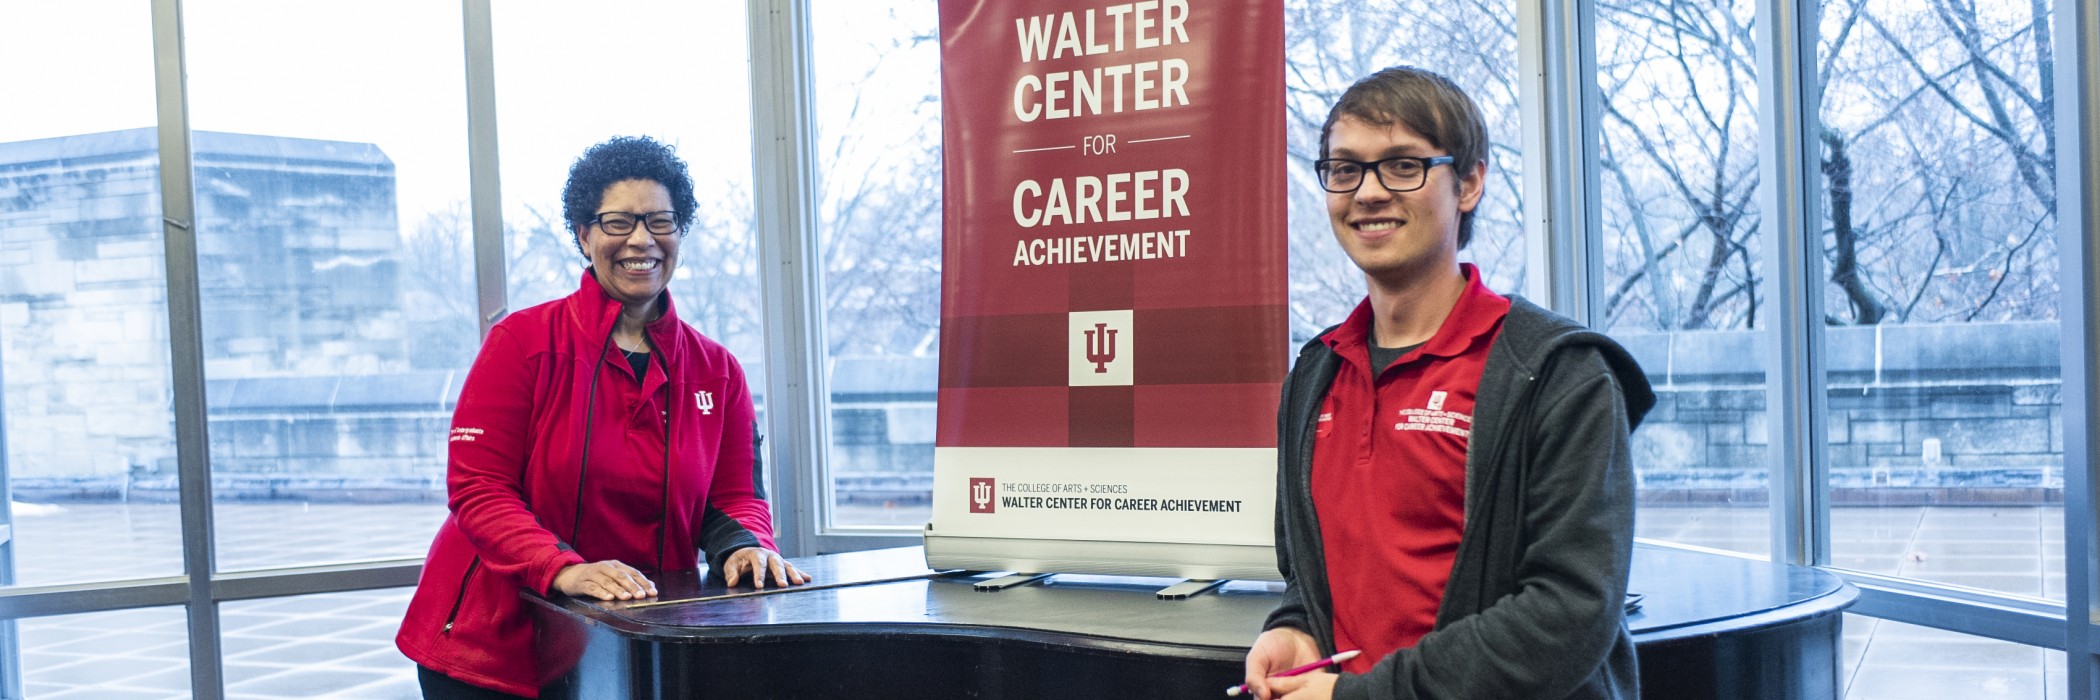 Two career coaches in red shirts in front of a sign that reads “Walter Center for Career Achievement”